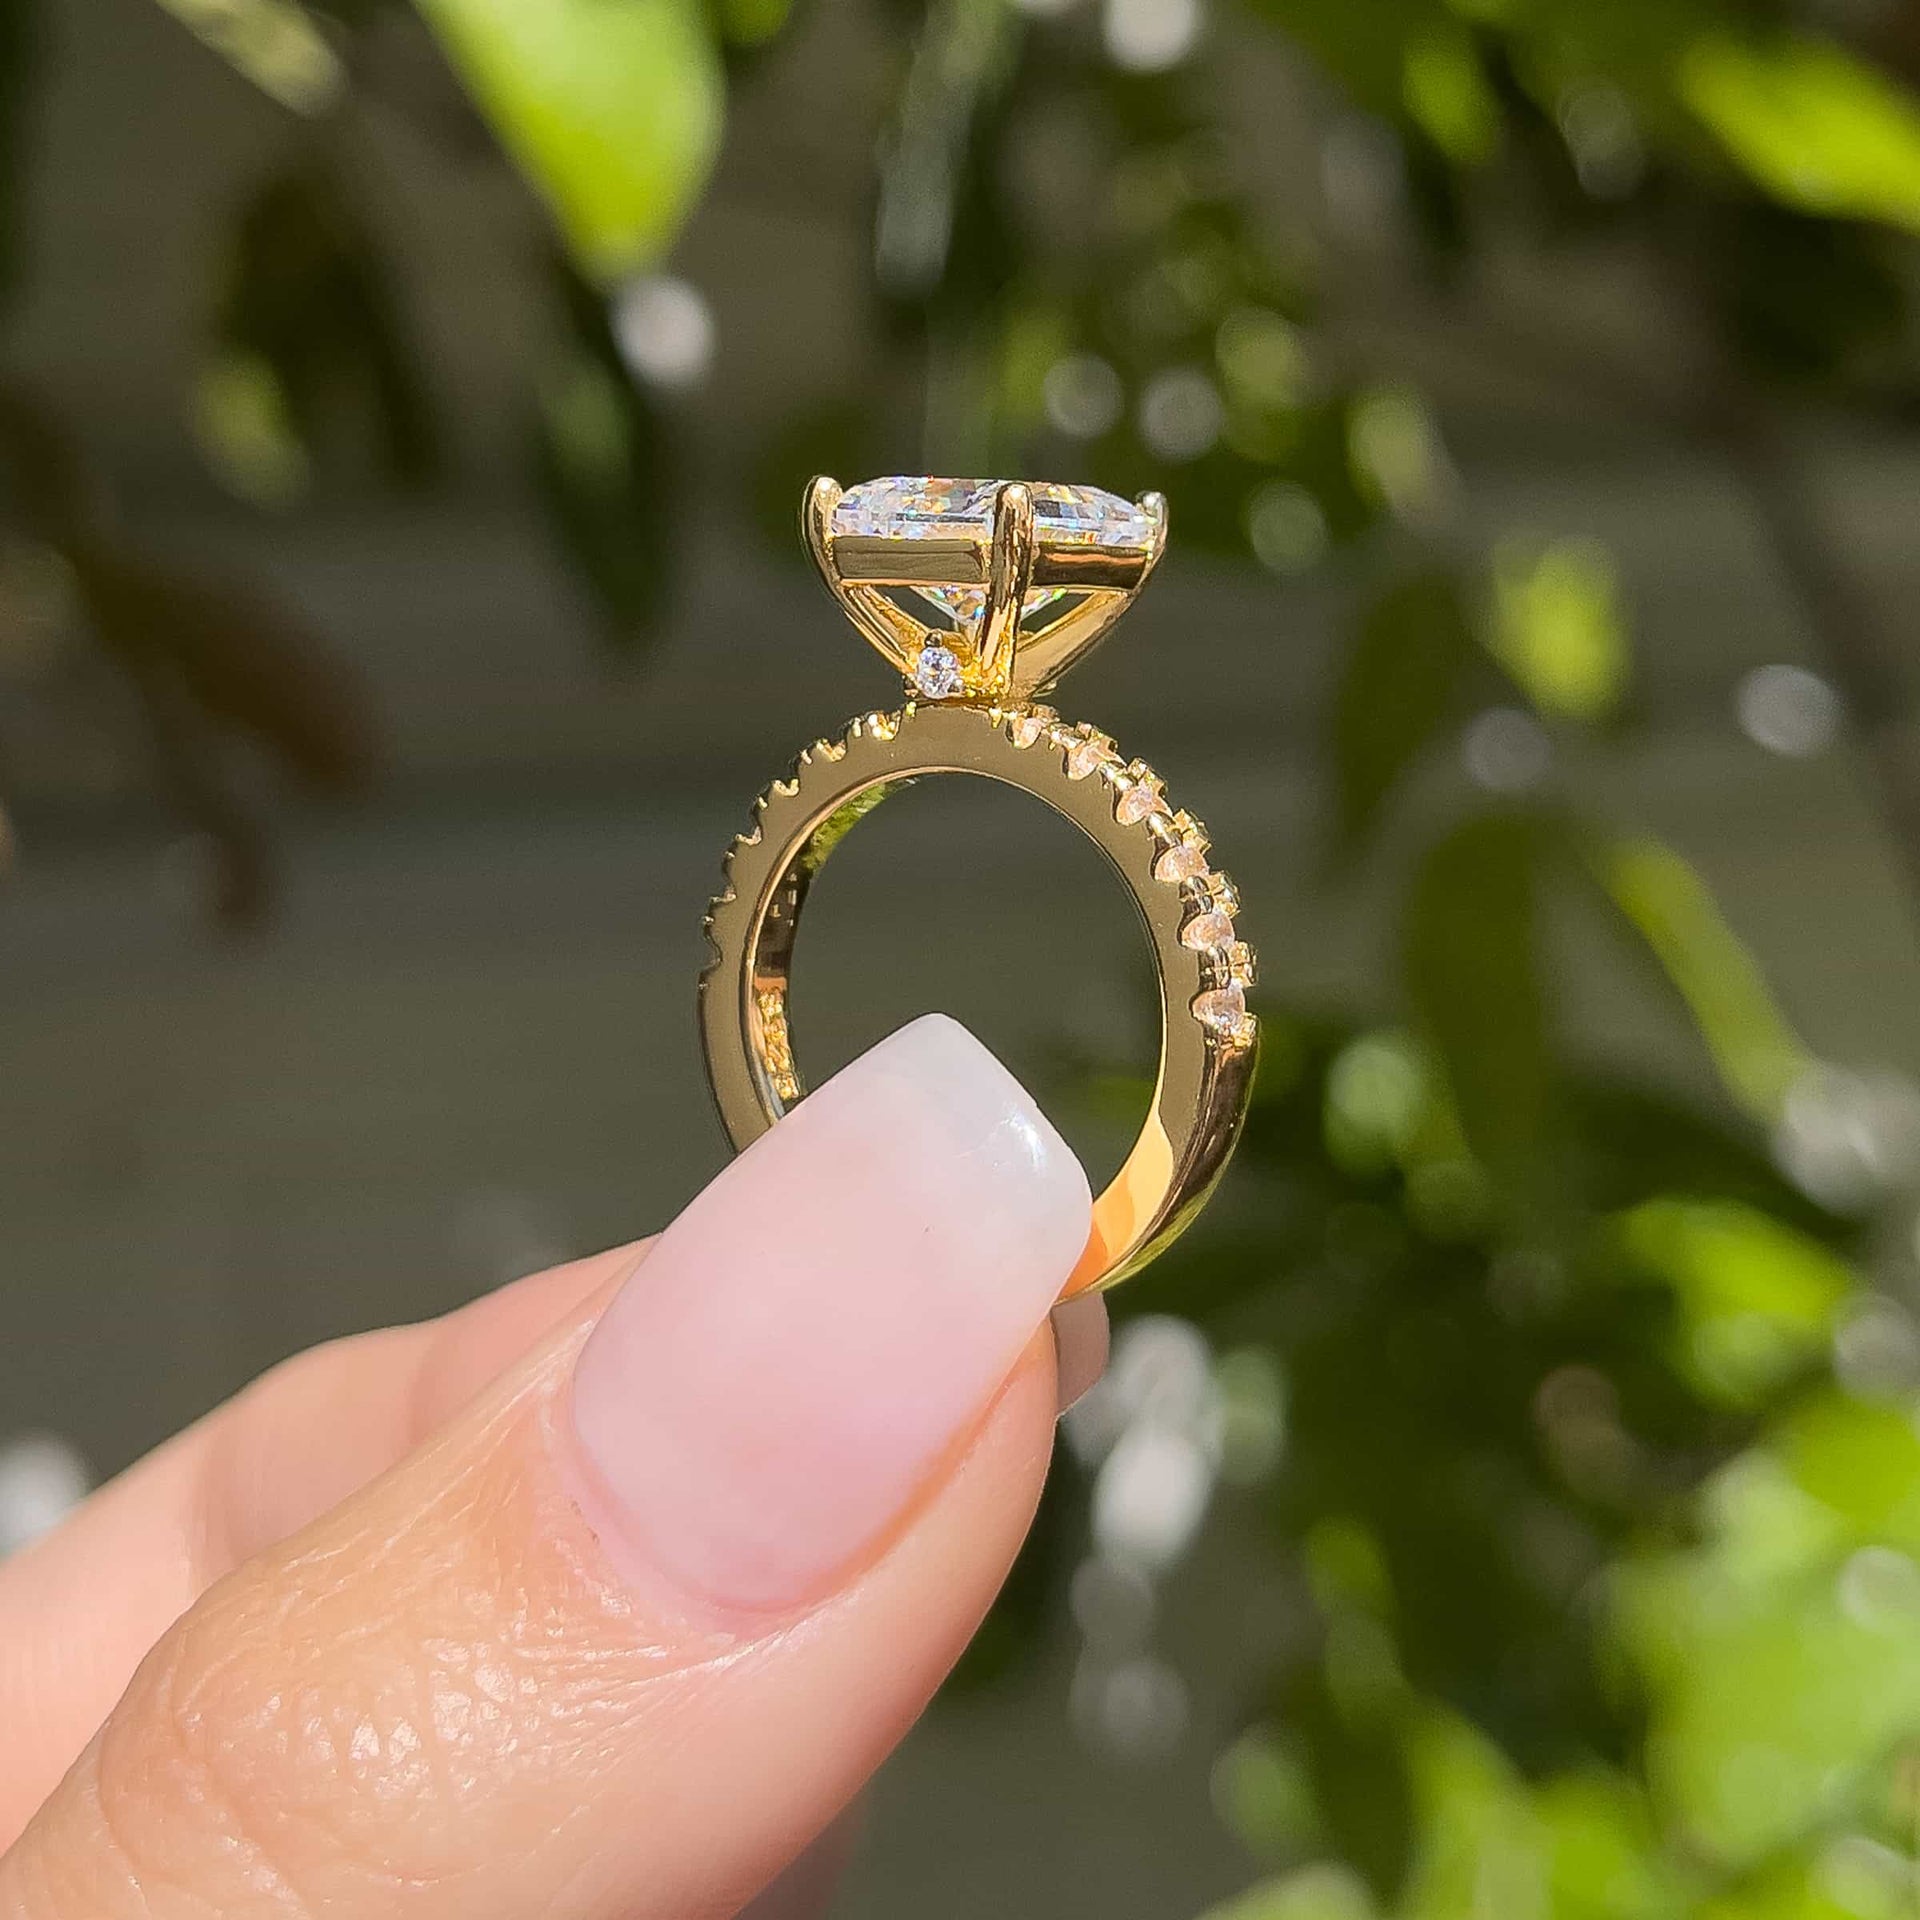 3.75 carat gold engagement ring setting shot shown in gold modeled on female with light pink nails and green background